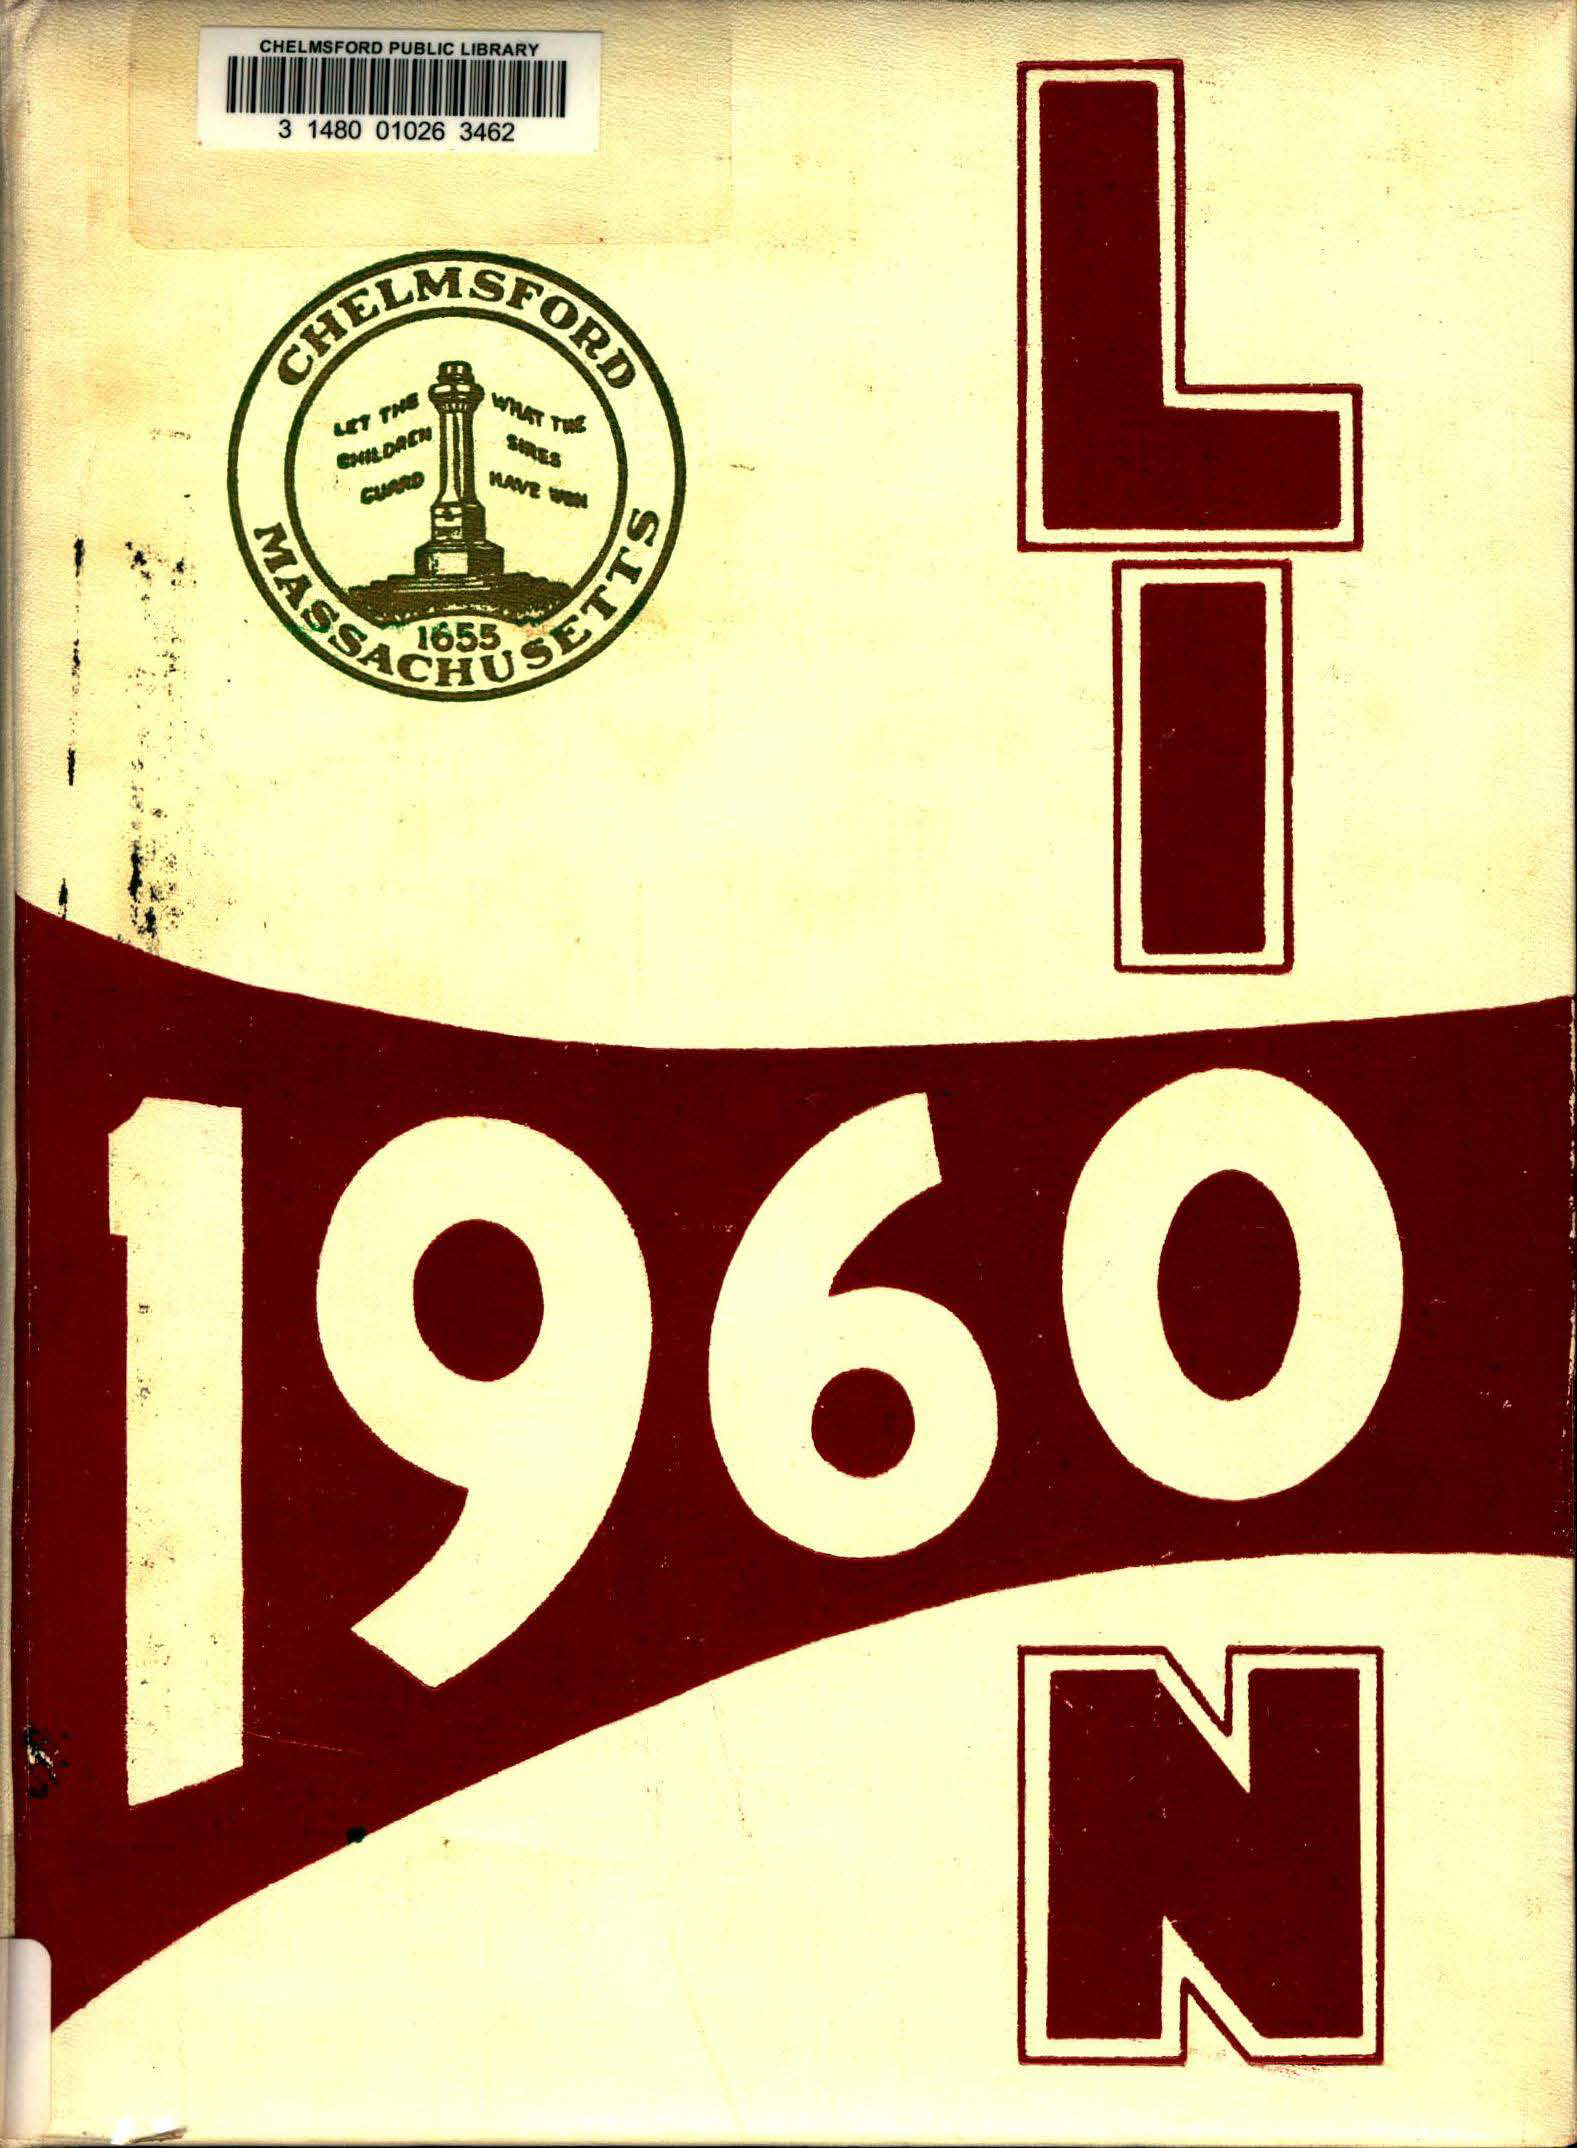 1960 Chelmsford High Yearbook 1